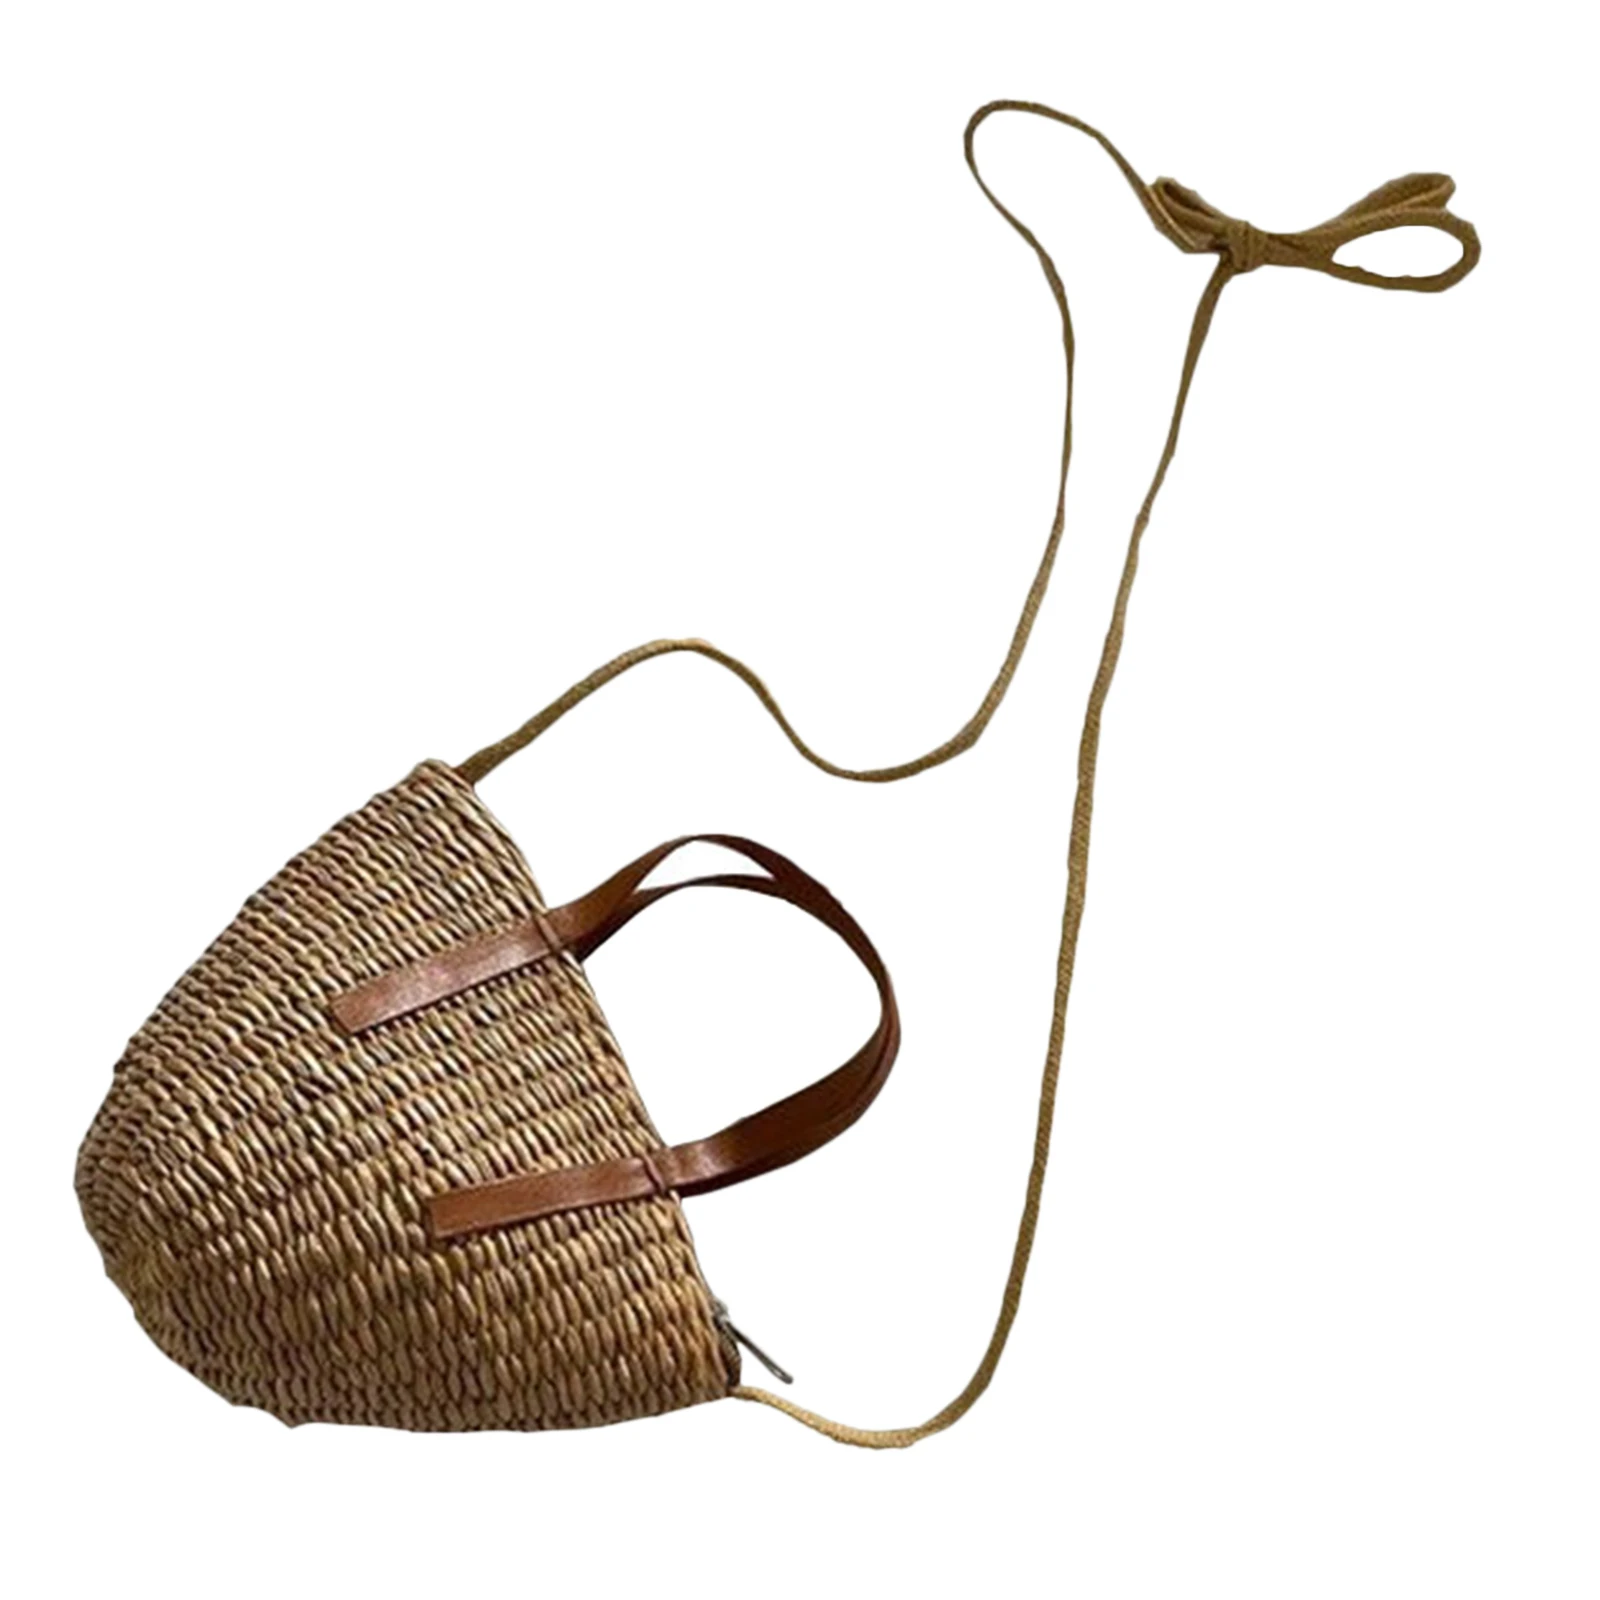 Cute Bamboo Children`s Bicycle Basket with Lid and Shoulder Strap,Handwoven Rattan Basket,Fashion Basket Bags for Kids